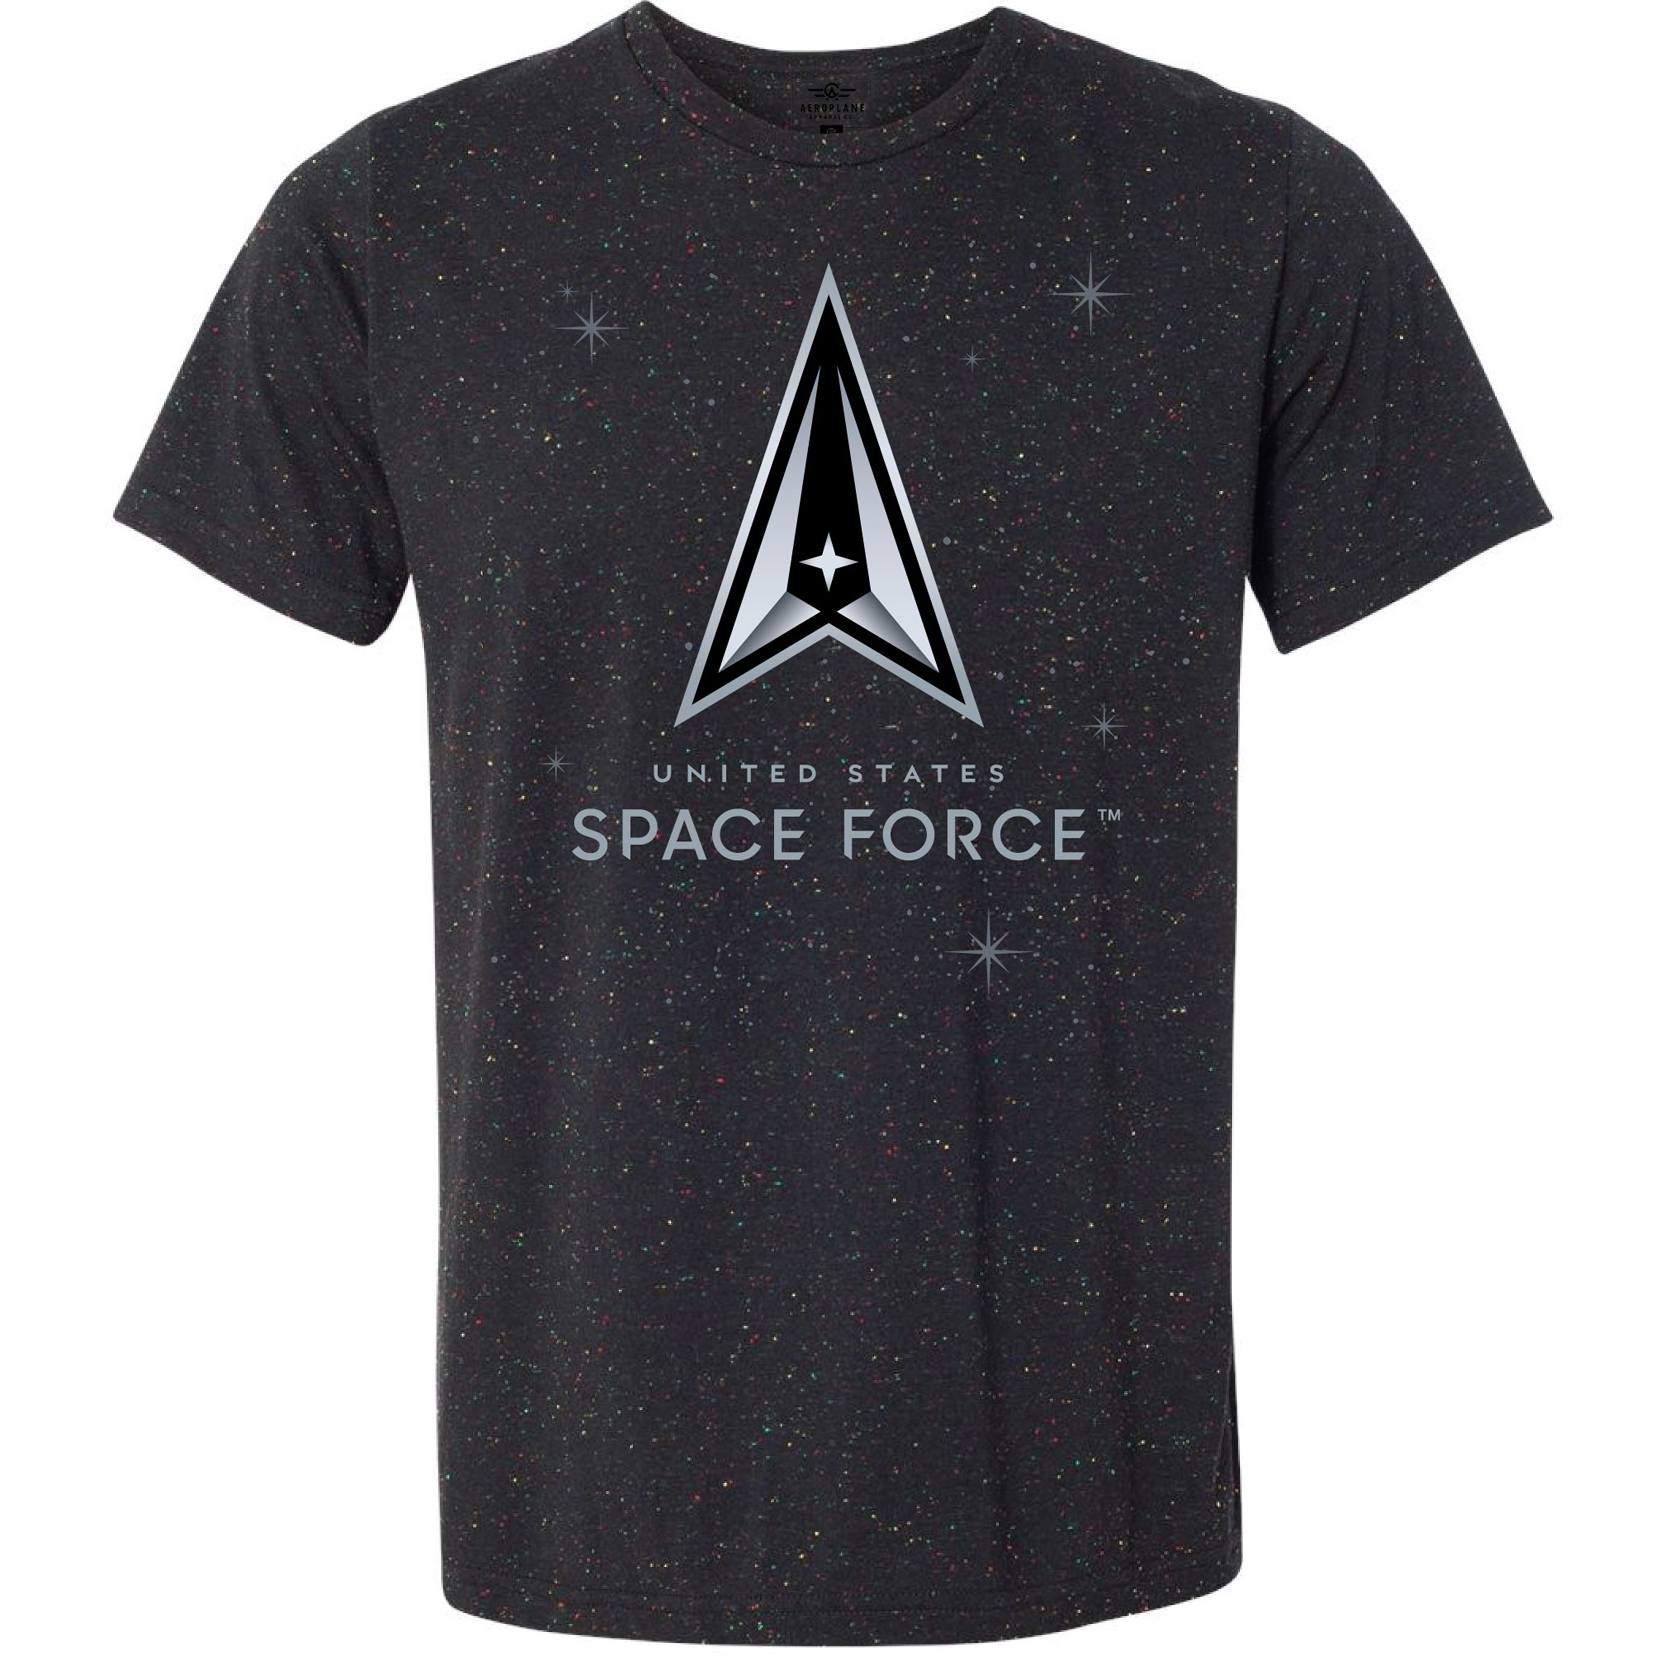 U.S. Space Force Officially Licensed Aeroplane Apparel Co. Men's T-Shirt - PilotMall.com